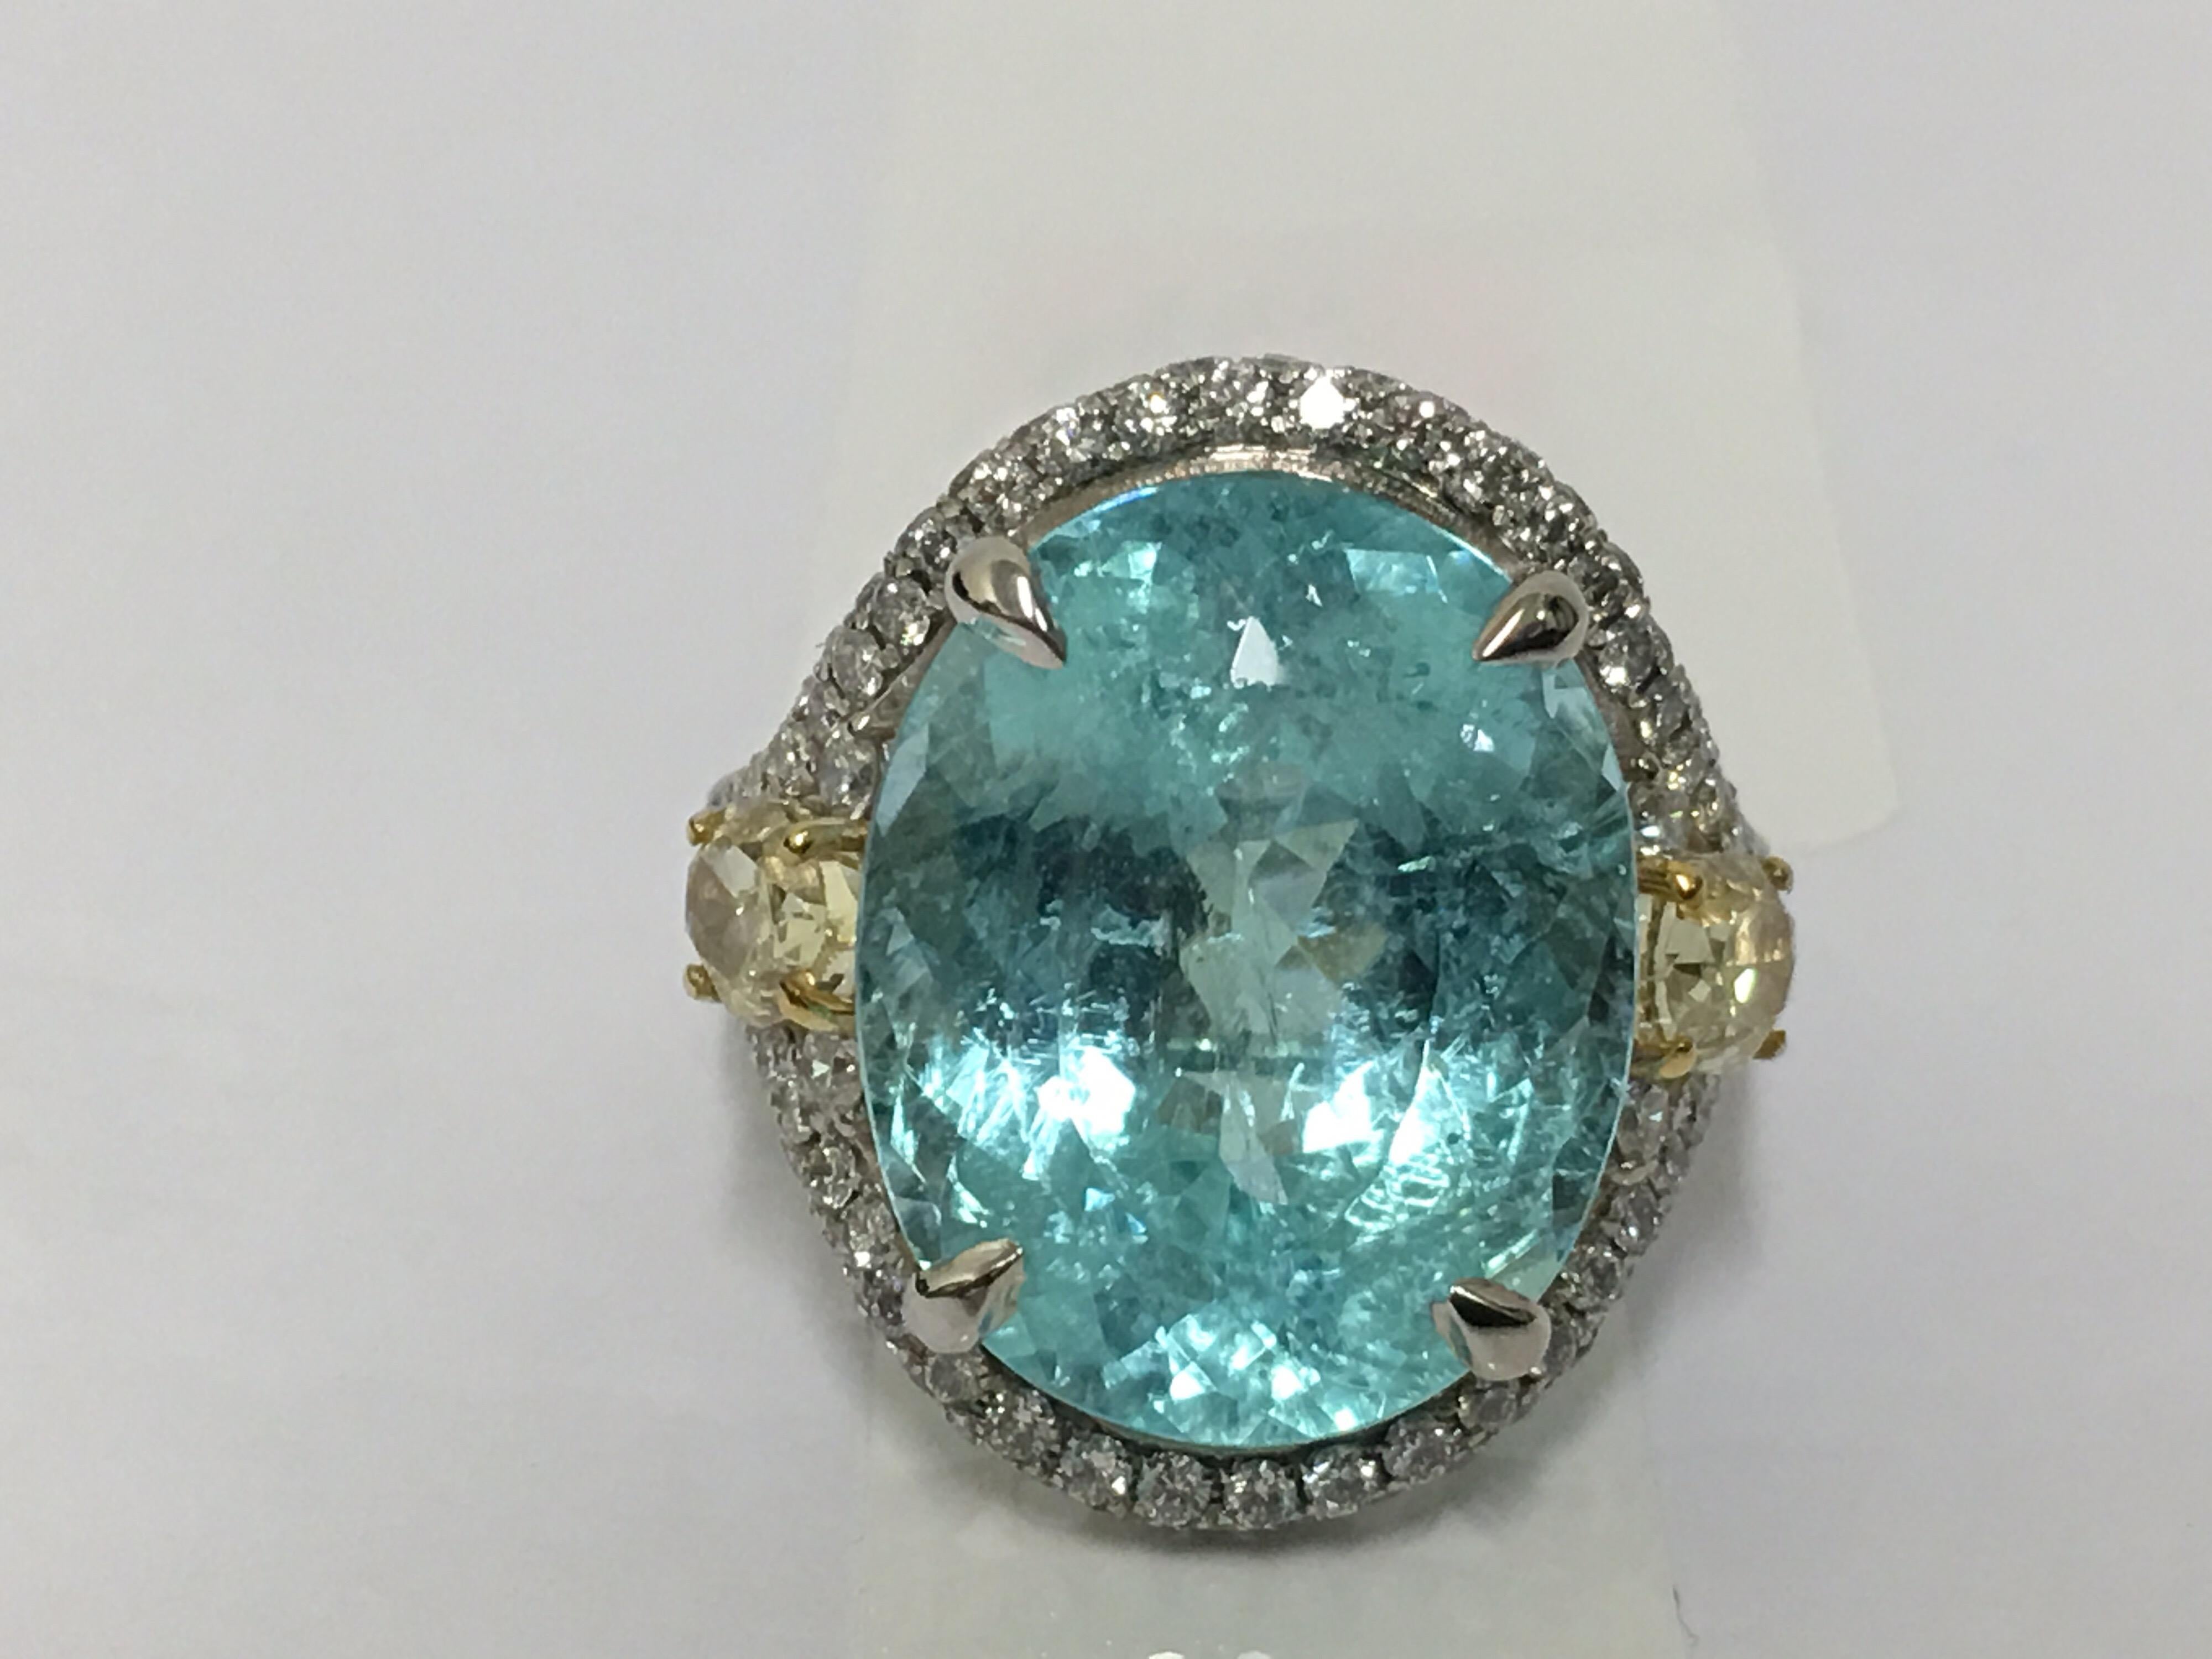 Natural 13.01 Carat Copper Bearing Paraiba Tourmaline is oval shape Stone Set in 18 Karat two tone gold .
Yellow diamonds is 1.05 Carat and other halo white round diamond is 1.03 Carat total. Size of the Ring is size 7 and if needed can be resized.